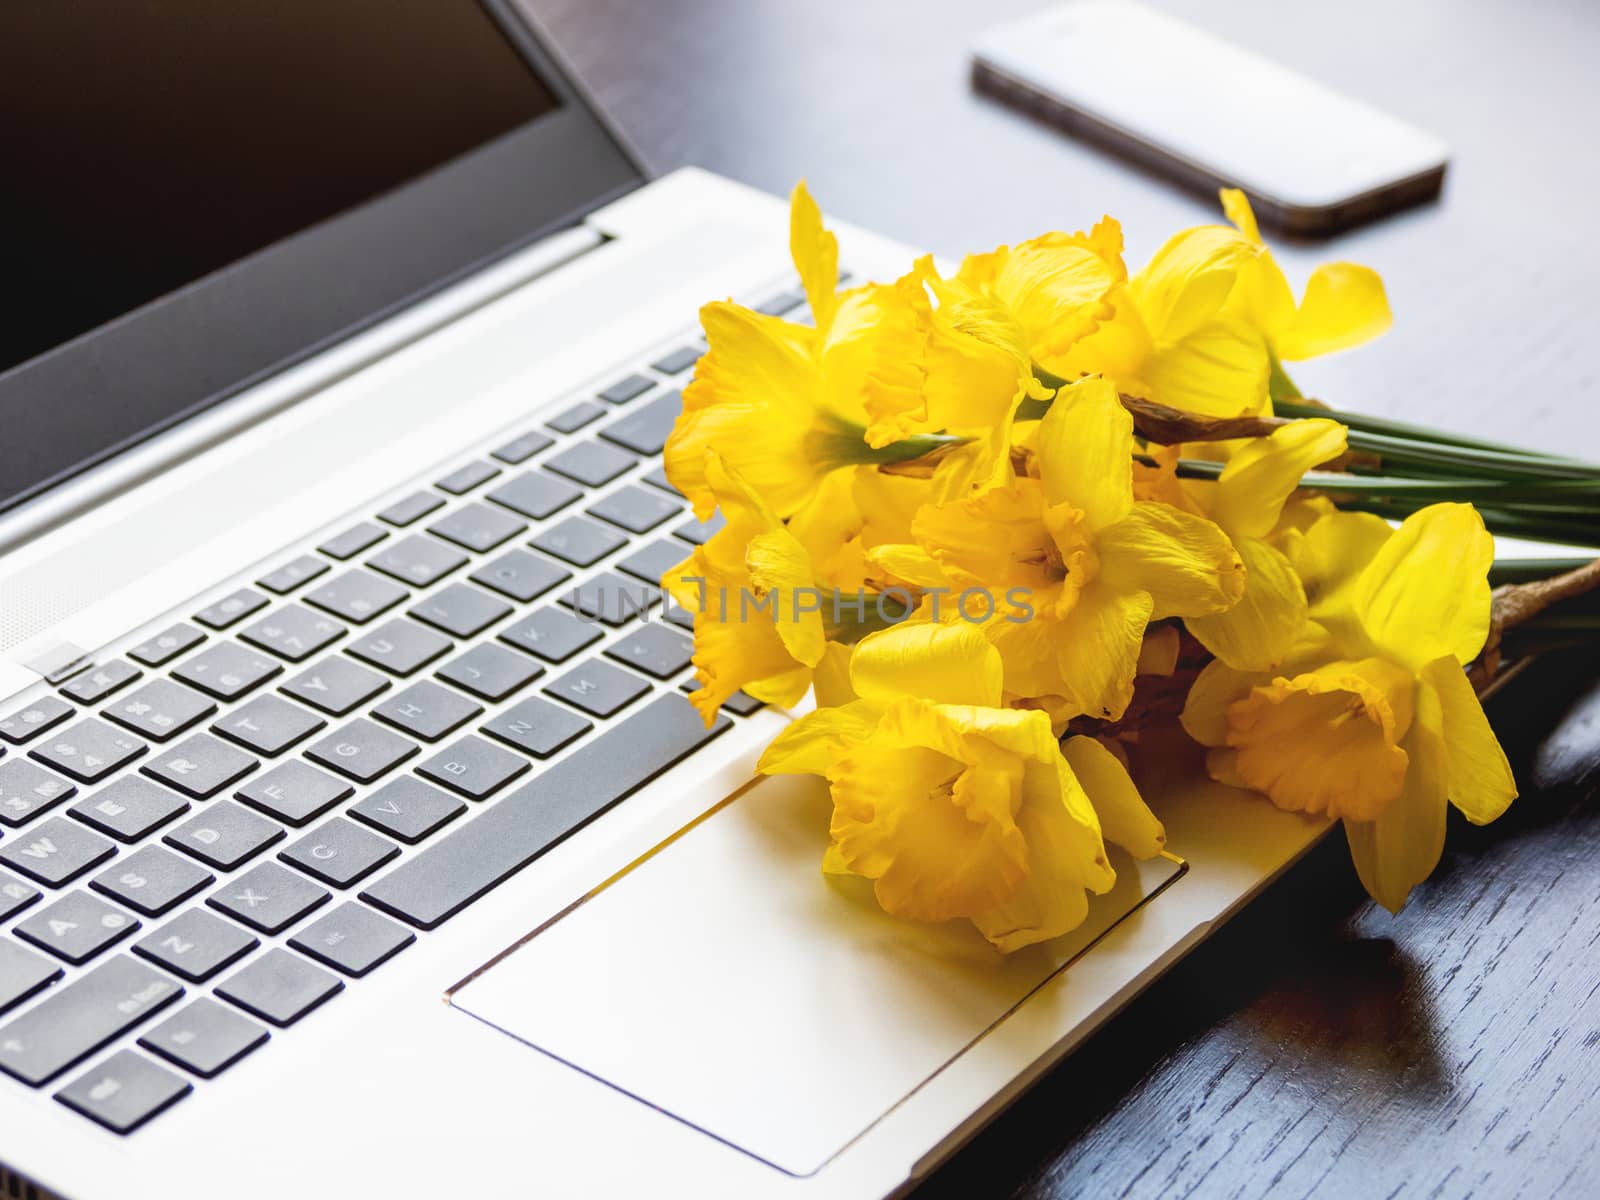 Bouquet of Narcissus or daffodils lying on silver metal laptop. Bright yellow flowers on portable device. Smartphone on wooden background. by aksenovko